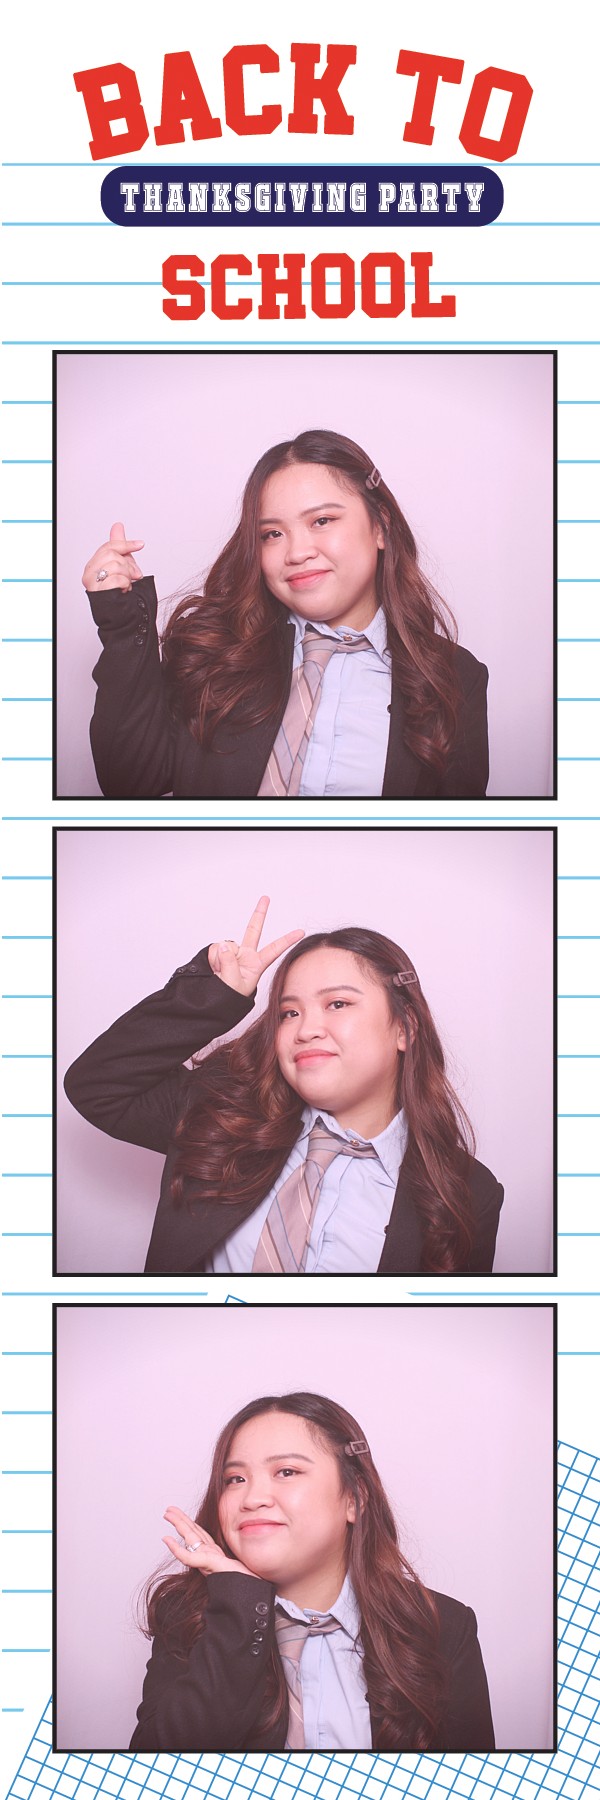 PepperLunch Thanksgiving Party – Vintage Booth